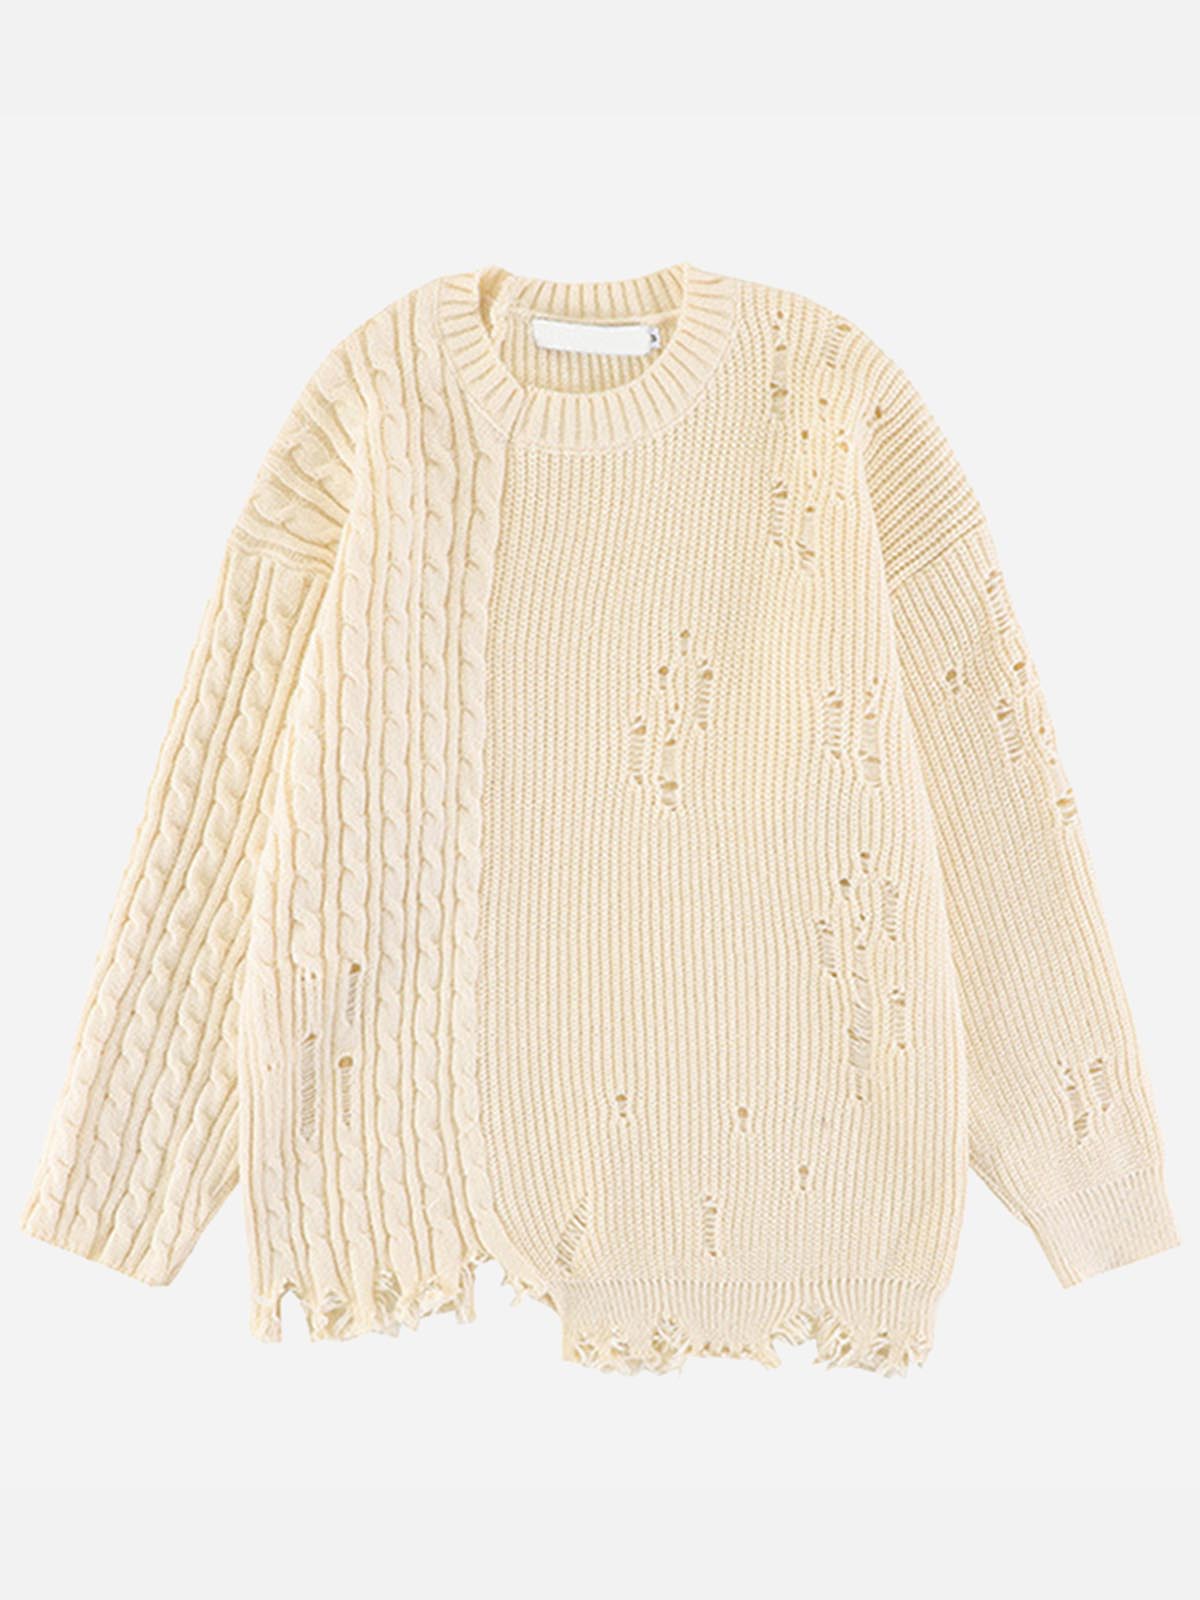 CYD URBAN SPLICE HOLES KNITTED SWEATER